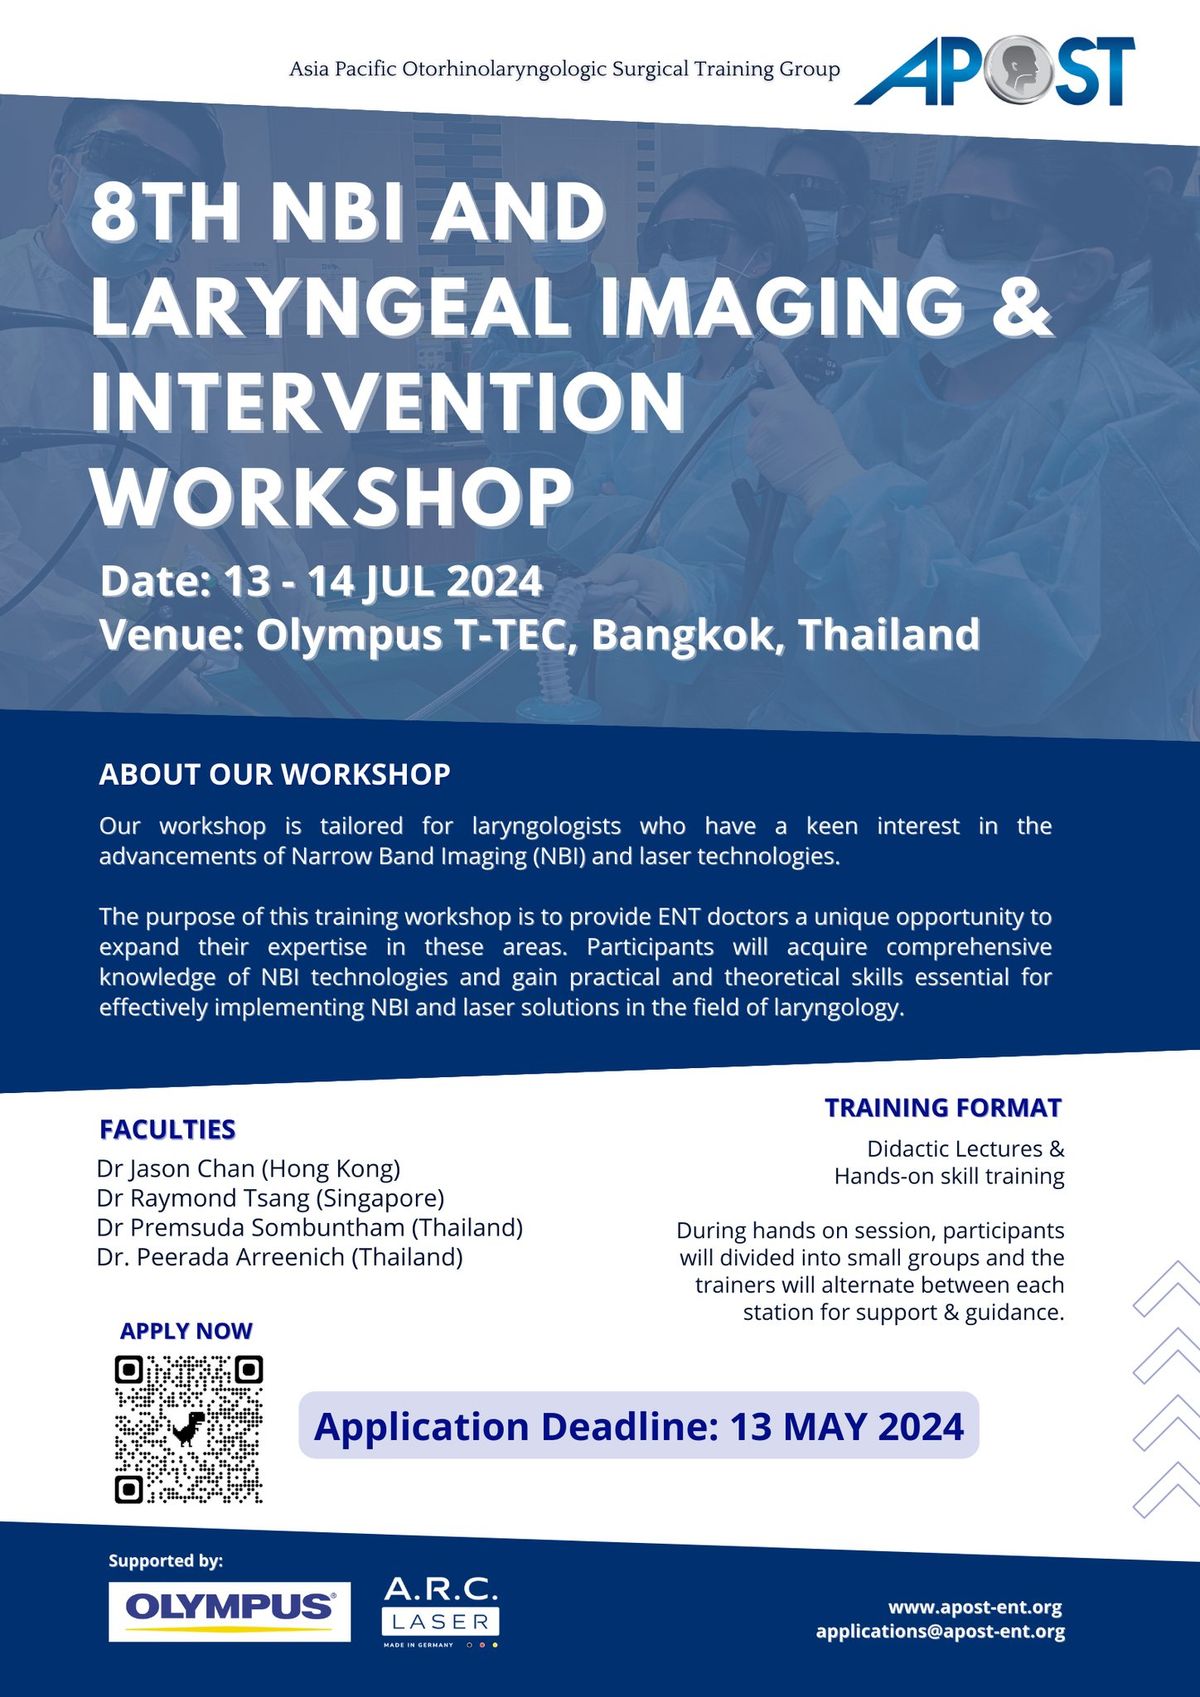 APOST 8th NBI and Laryngeal Imaging & Intervention Workshop